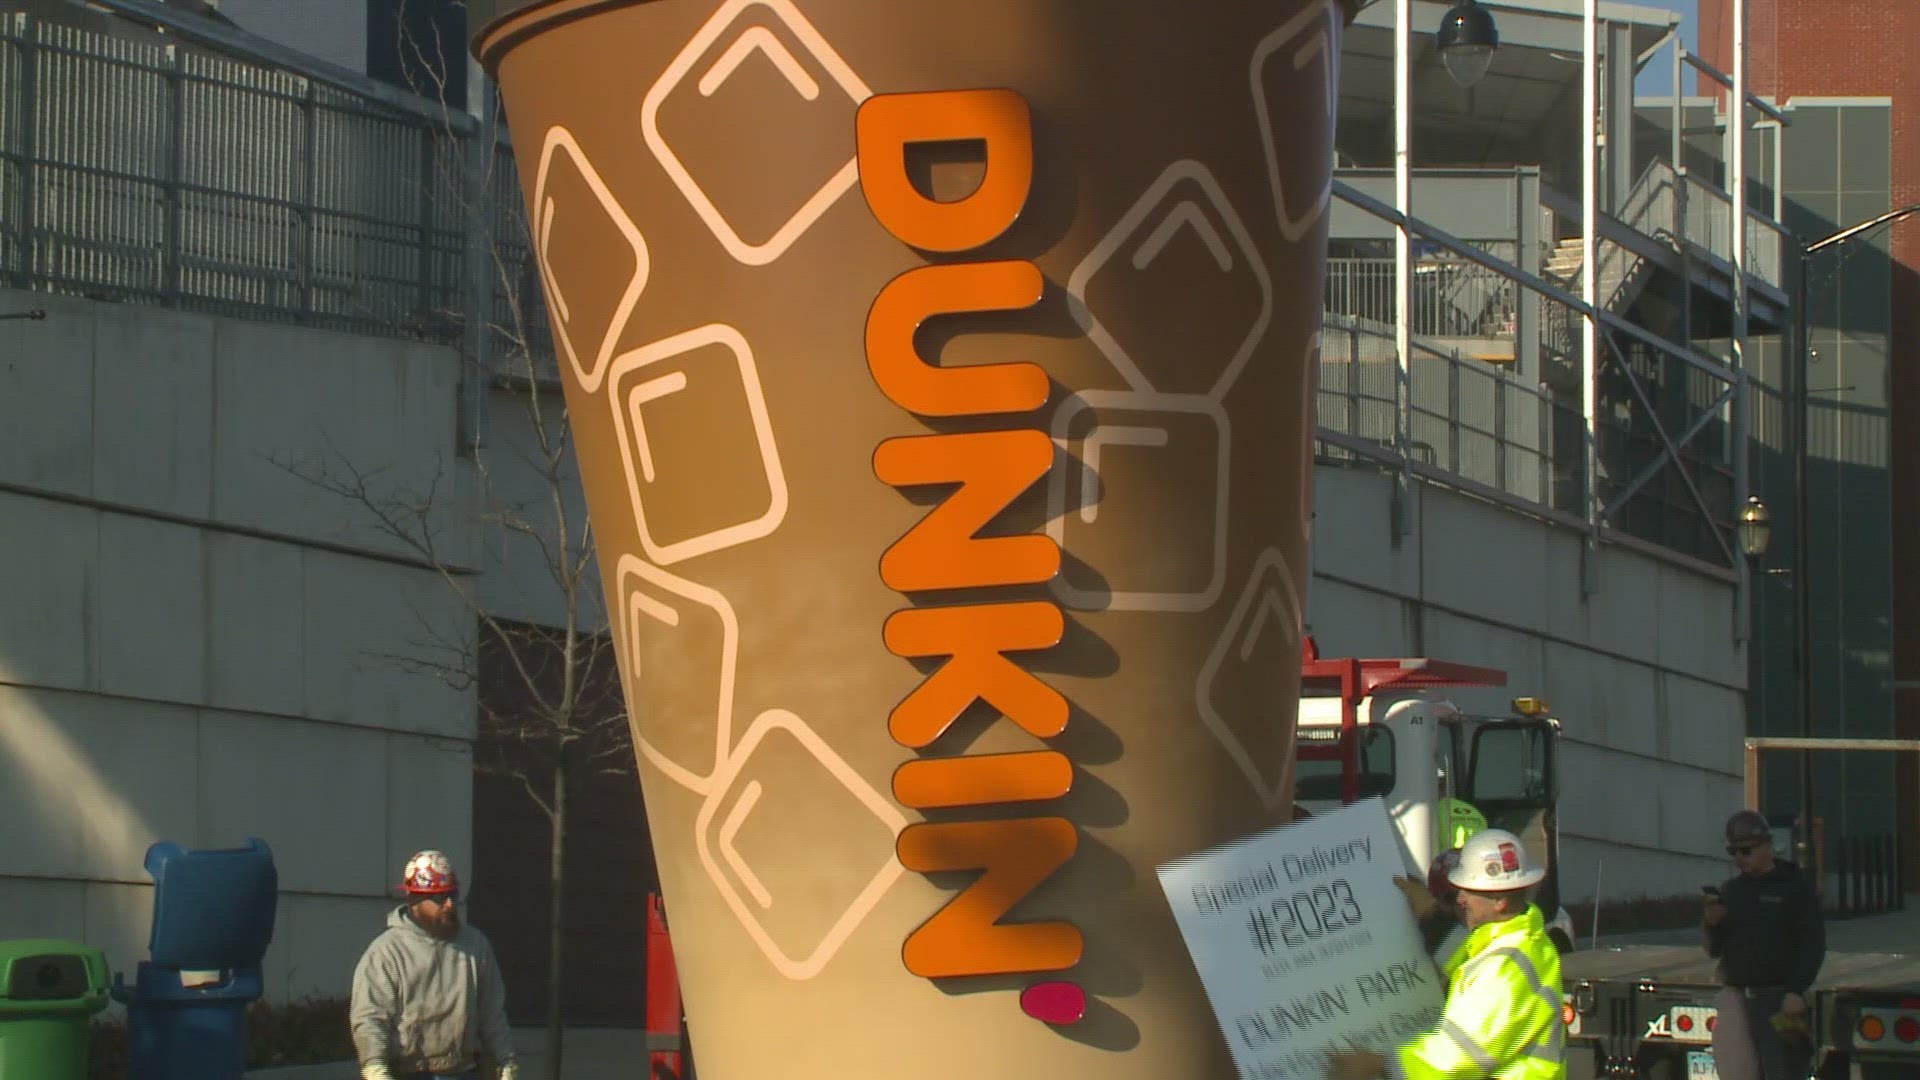 The new signage for Dunkin' Park officially went up on Tuesday along with the newly improved Dunkin' cup.